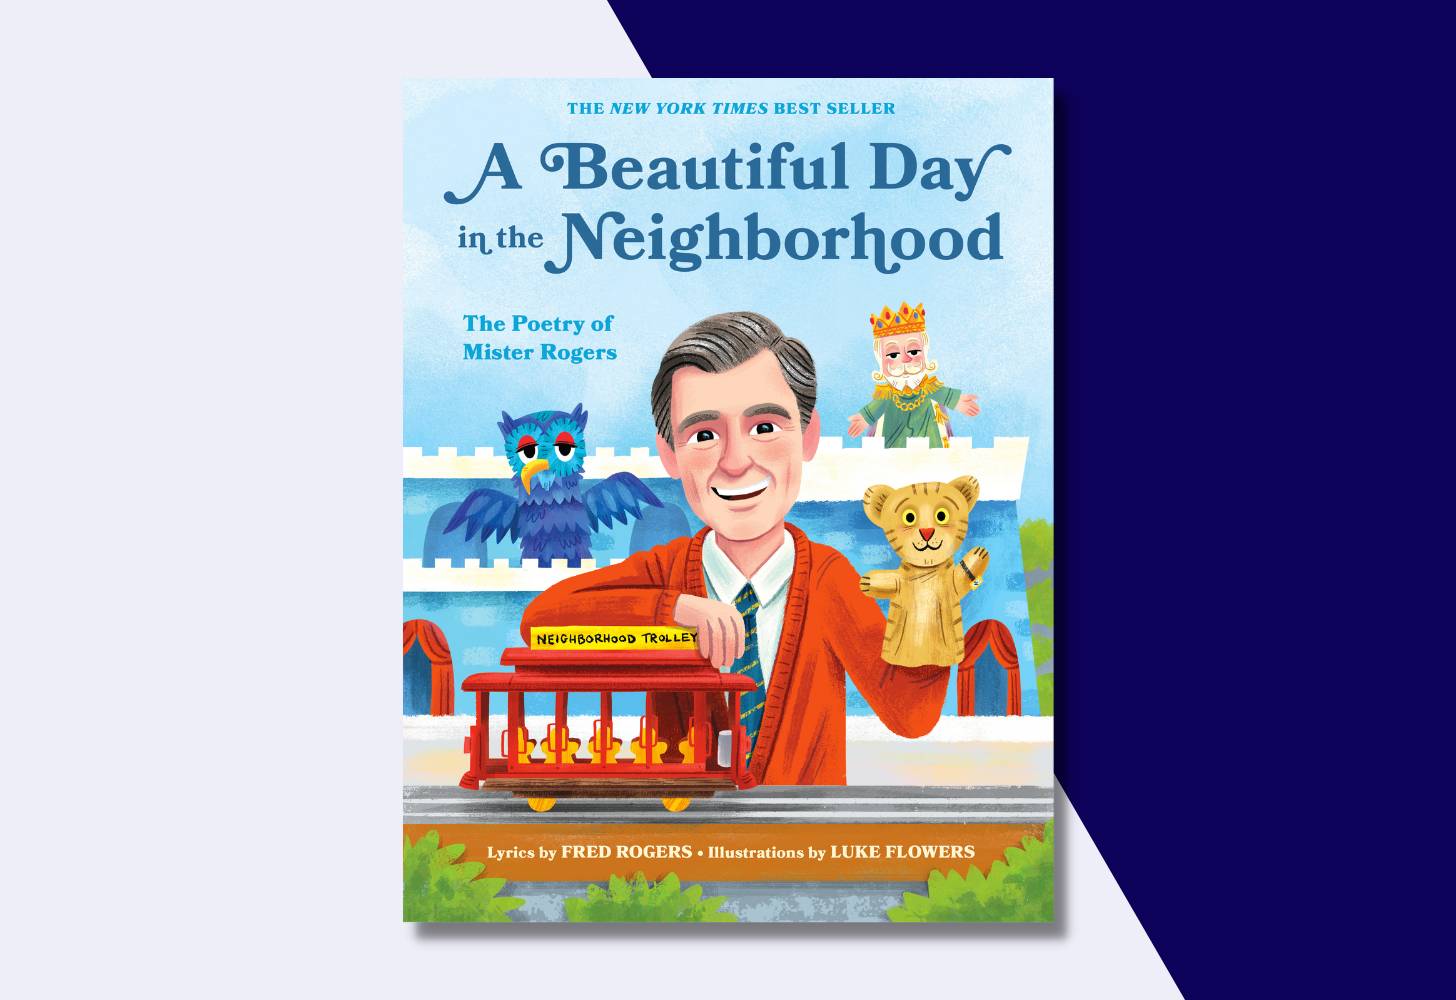 “A Beautiful Day In the Neighborhood: The Poetry of Mister Rogers” by Fred Rogers, illustrated by Luke Flowers